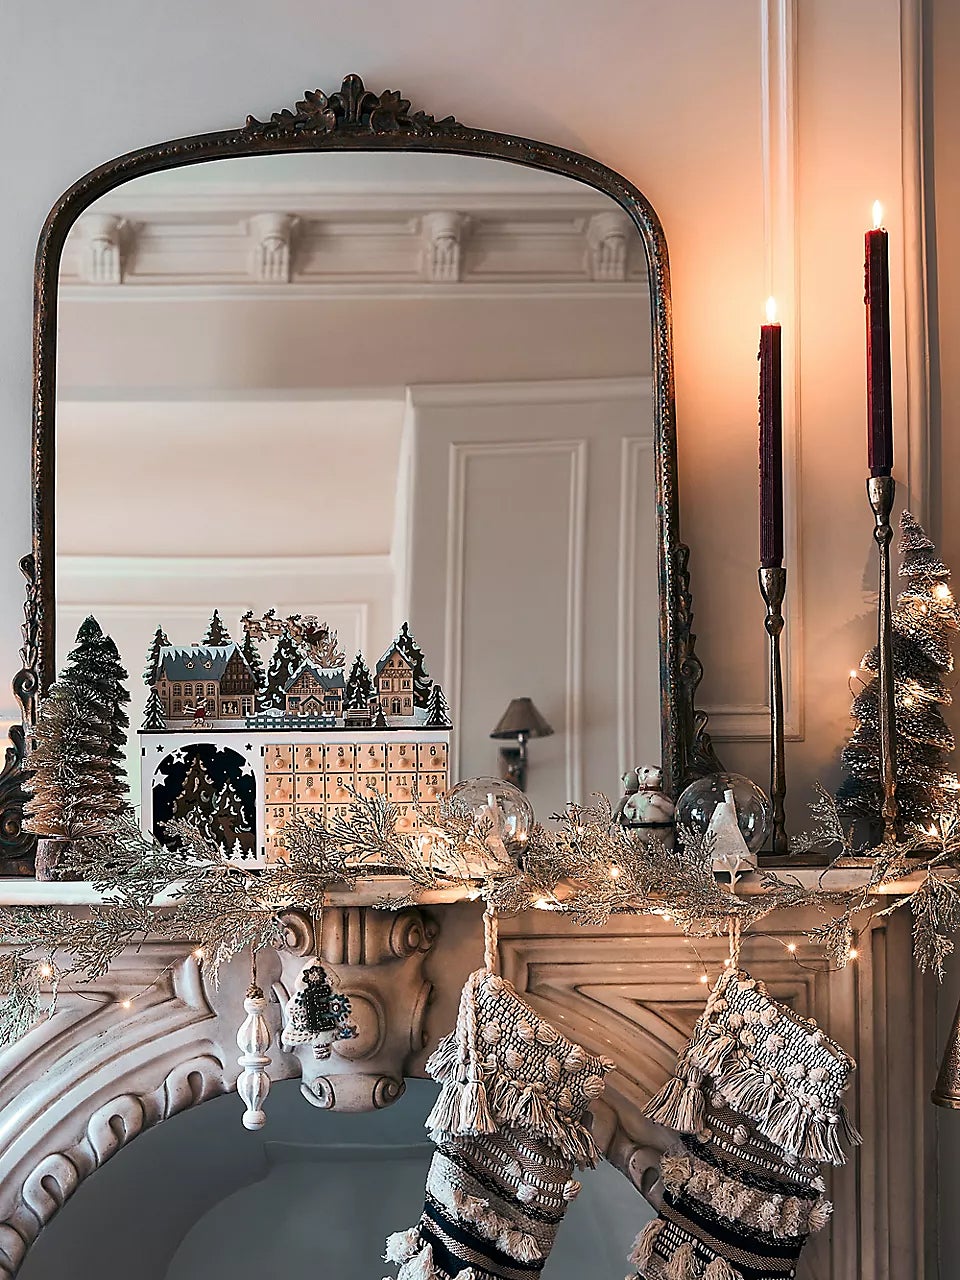 Mirror on a mantel with candlesticks